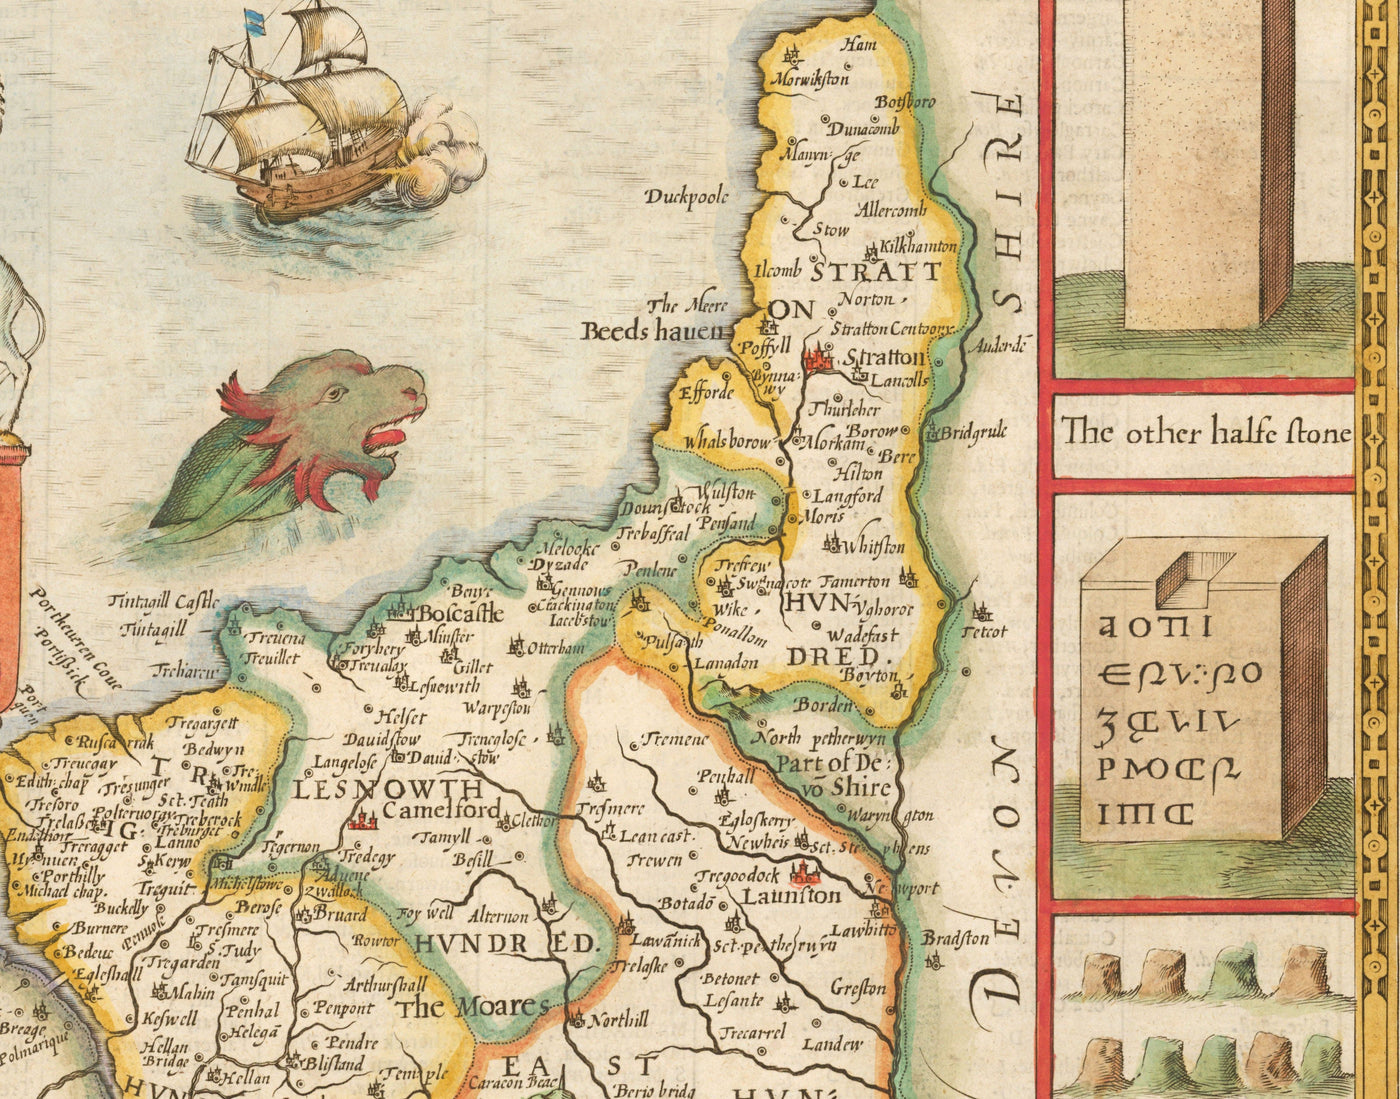 Old Map of Cornwall, 1611 by John Speed - Falmouth, Redruth, St Austell, Truro, Penzance